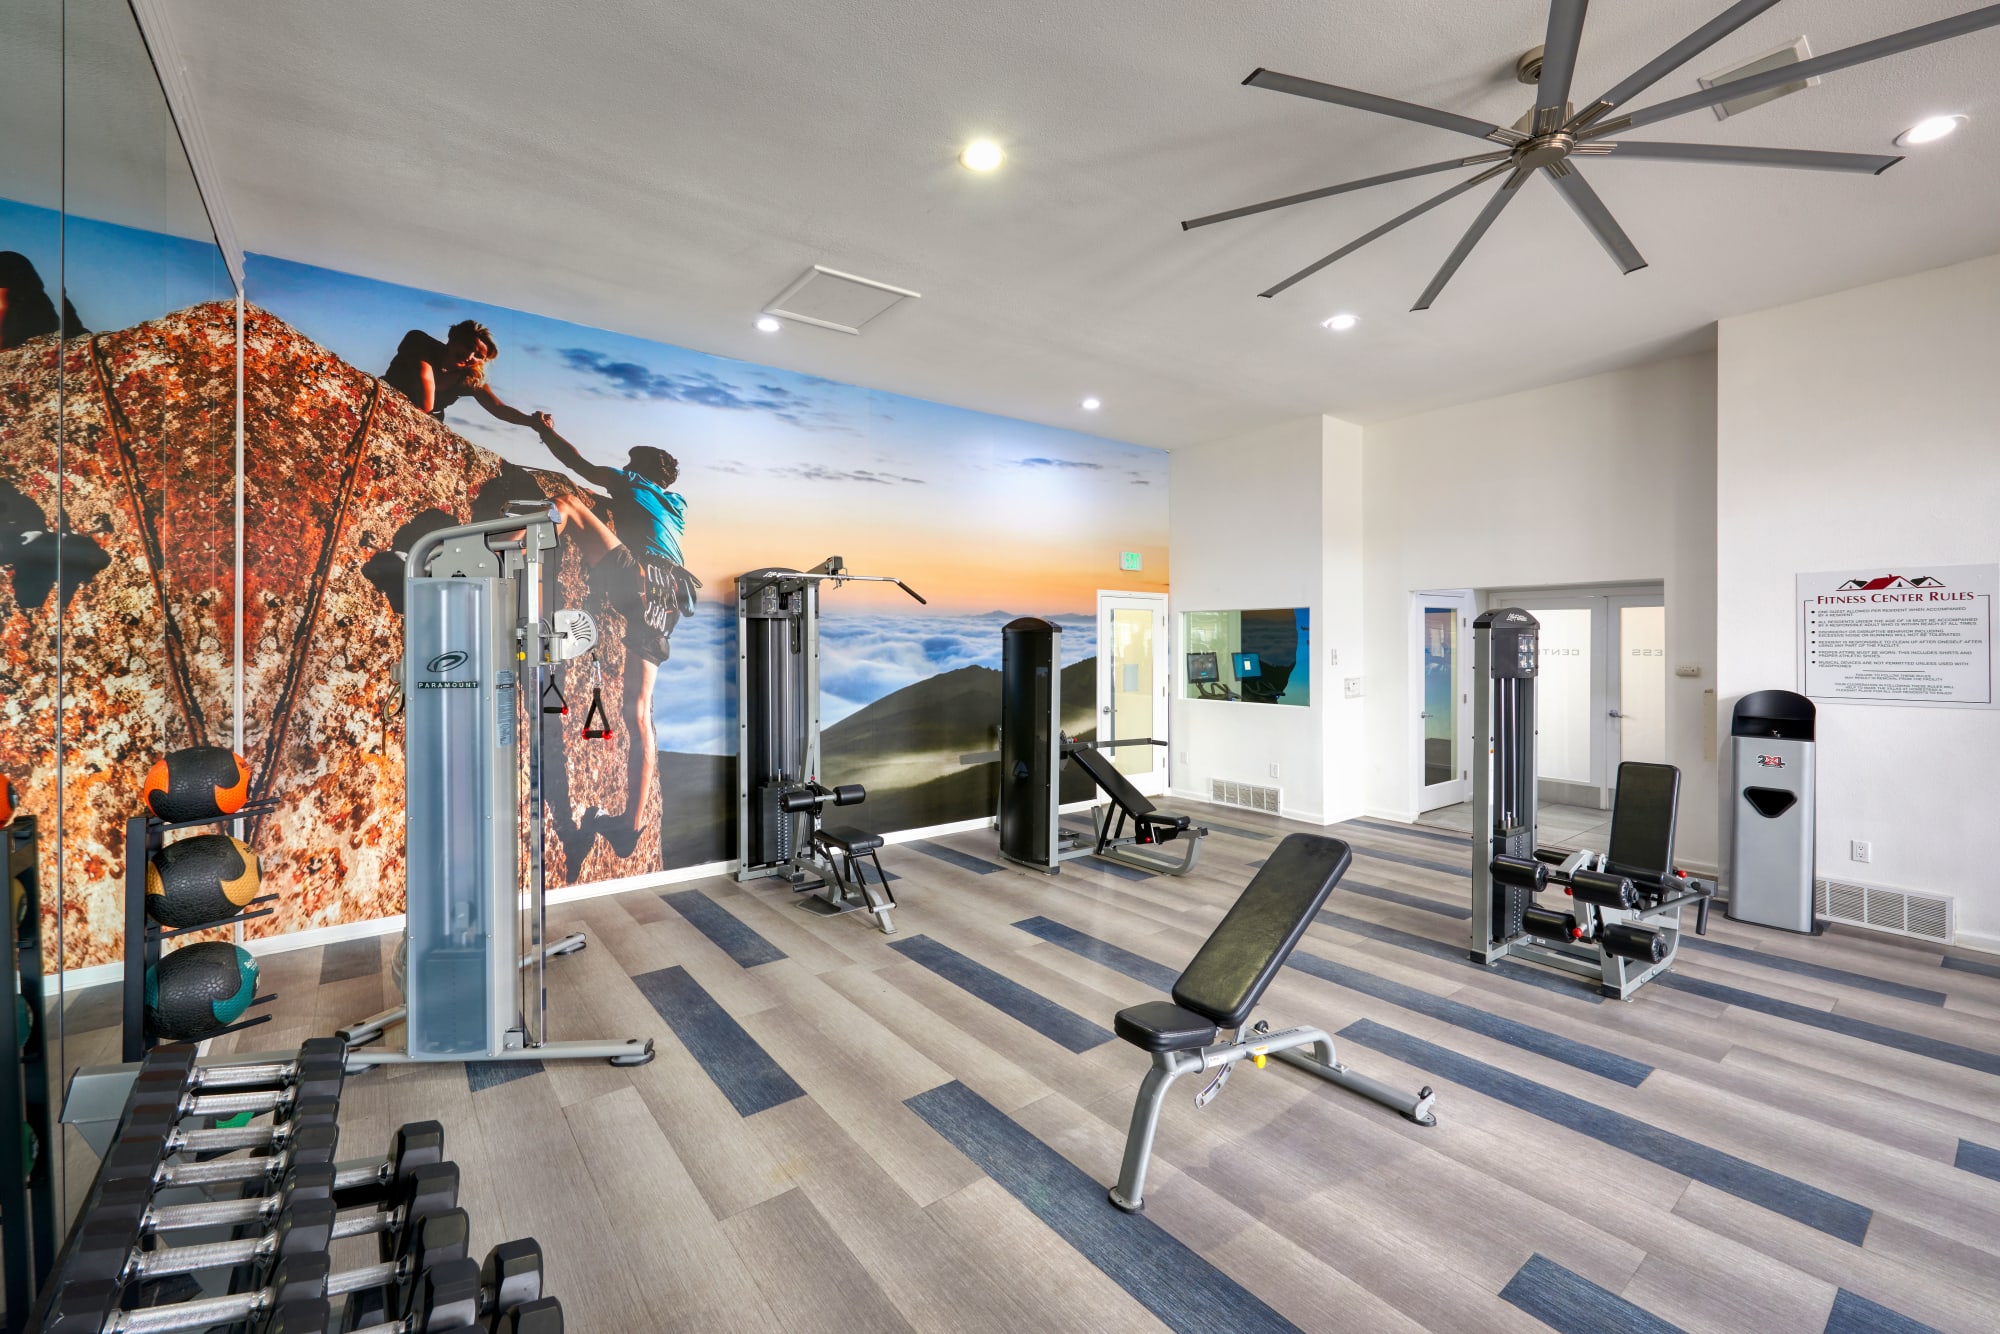 Fully equipped gym at Villas at Homestead Apartments in Englewood, Colorado